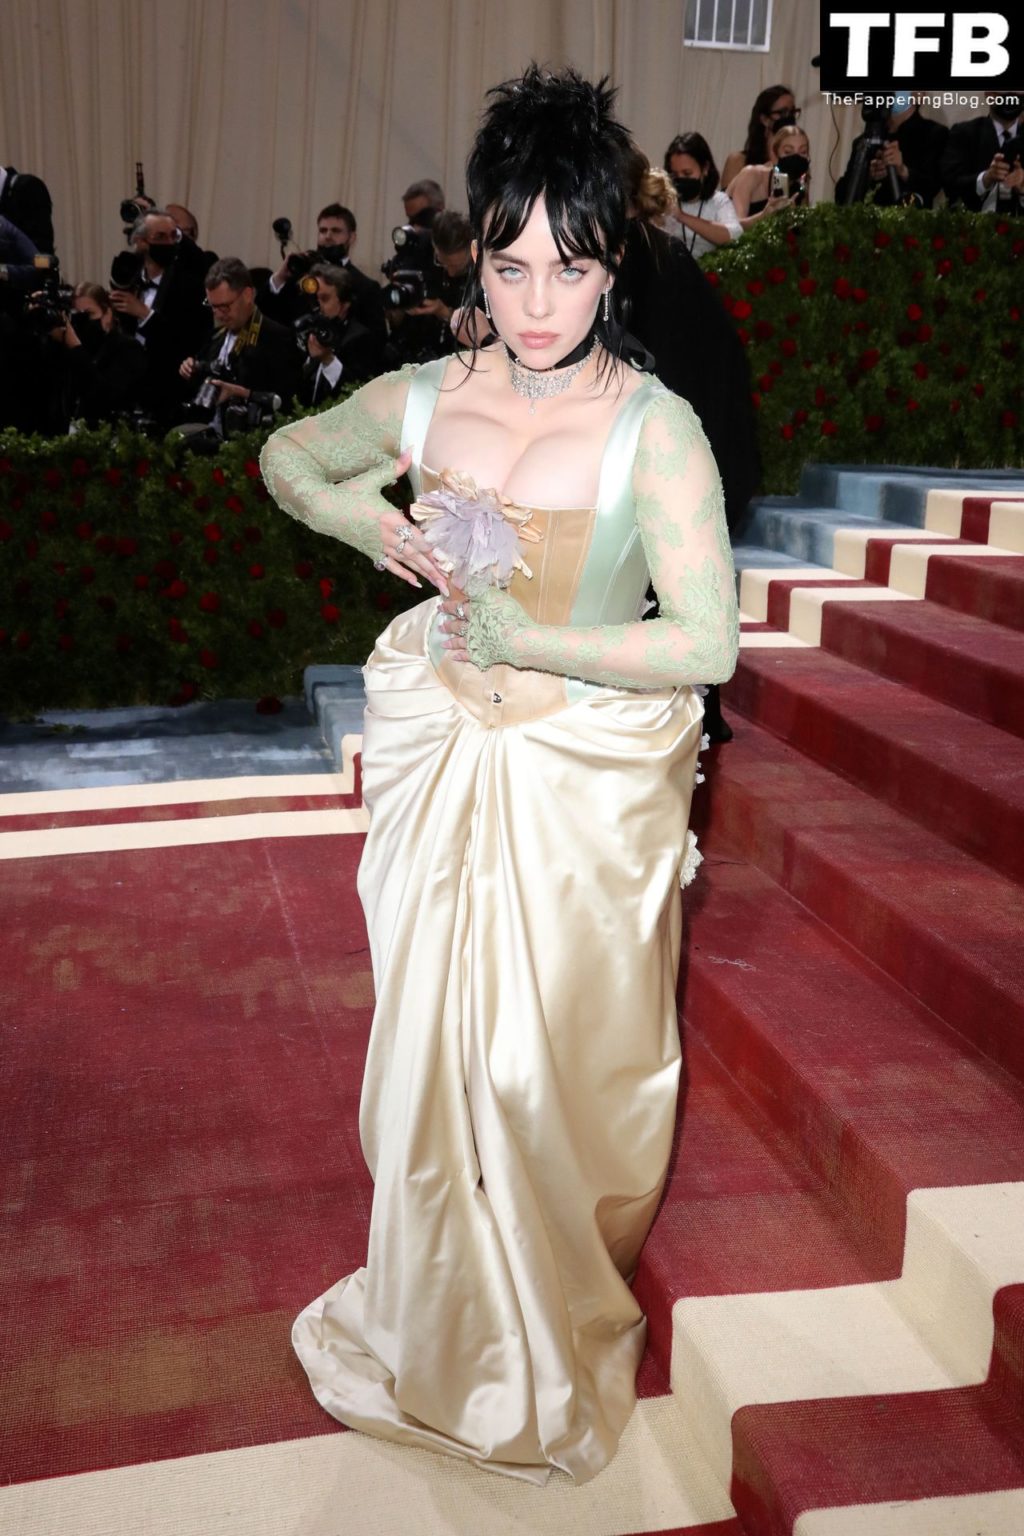 Billie Eilish Sexy The Fappening Blog 143 1024x1536 - Billie Eilish Showcases Nice Cleavage at The 2022 Met Gala in NYC (155 Photos)